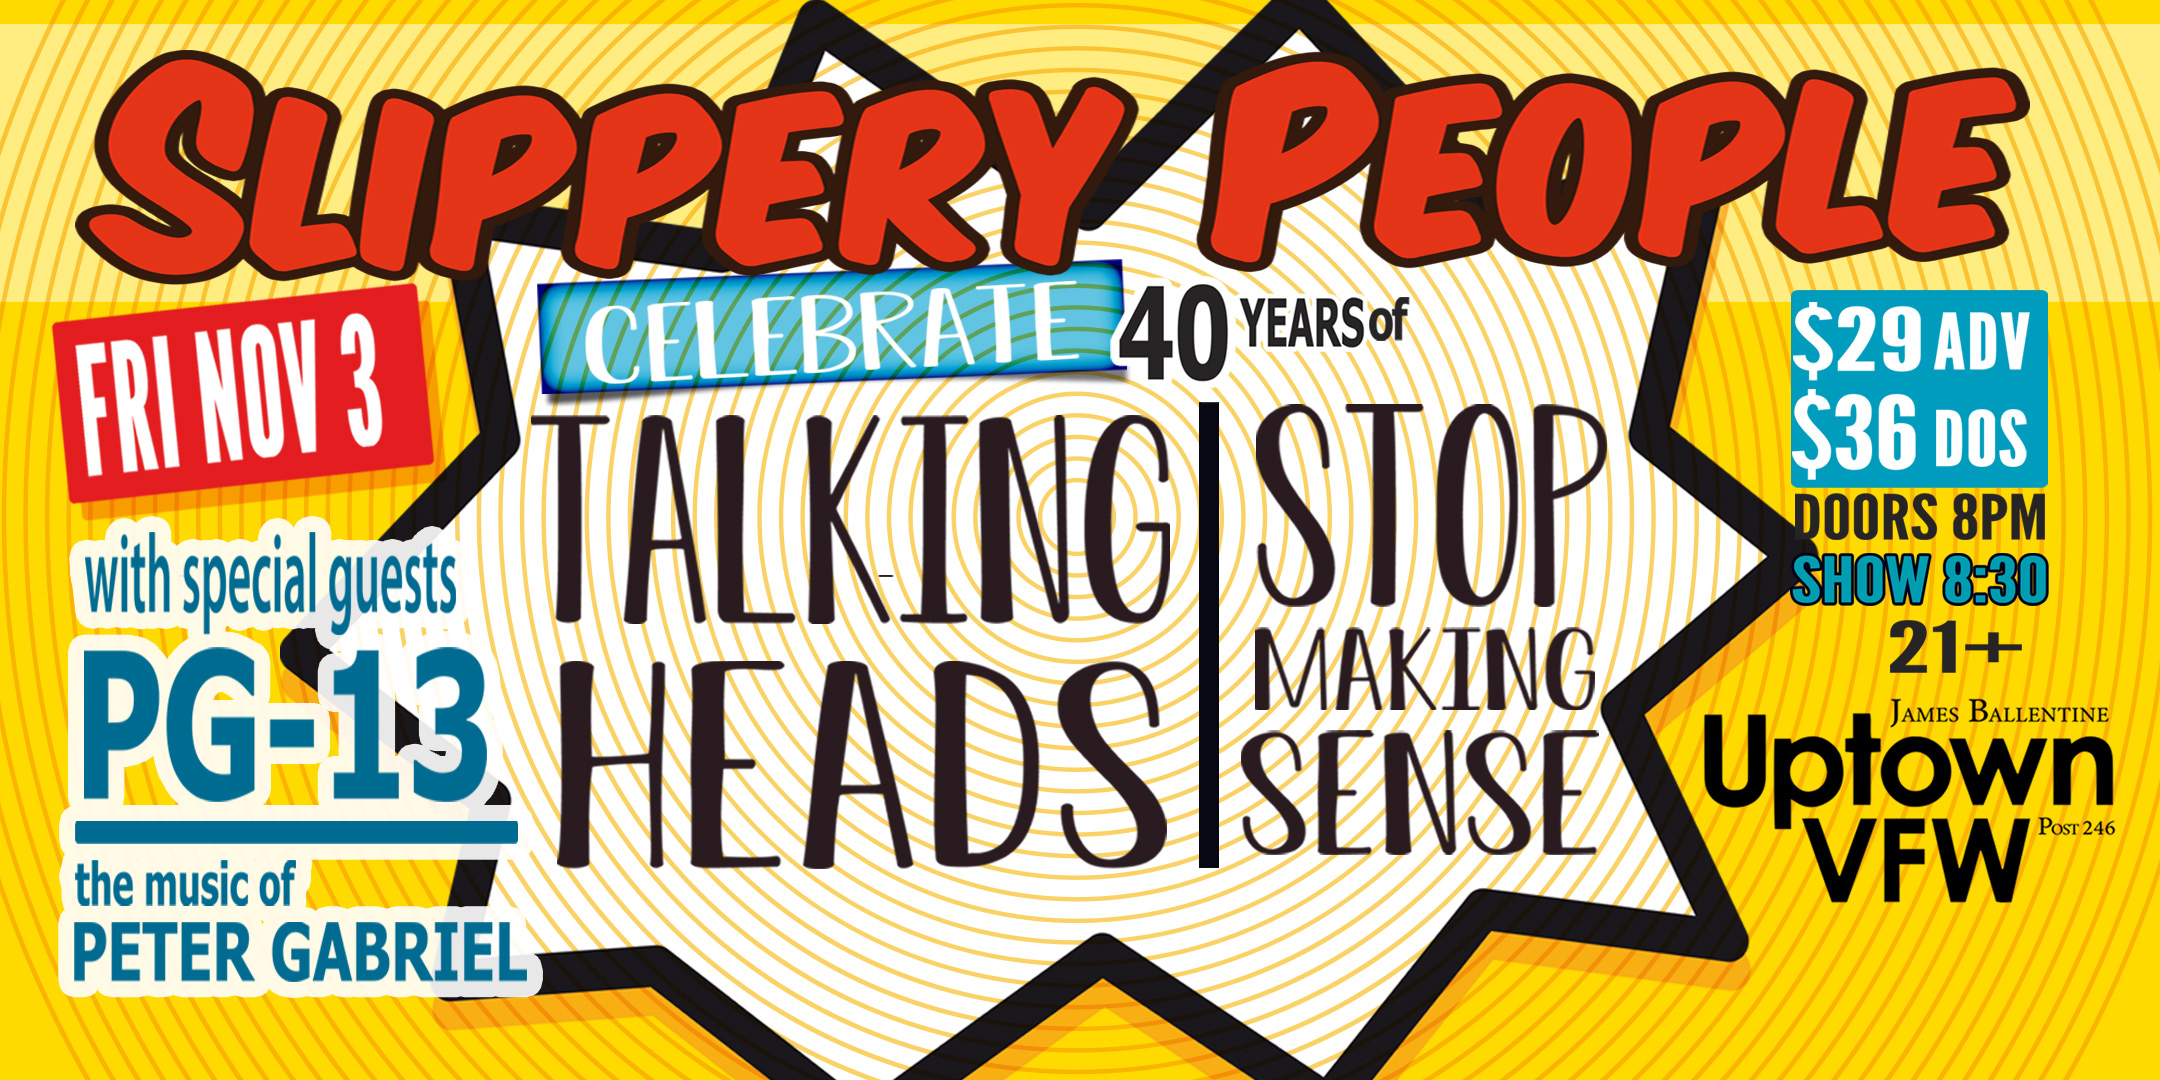 Slippery People with guest PG-13 Celebrating The 40th Anniversary of Stop Making Sense Friday, November 3 James Ballentine "Uptown" VFW Post 246 Doors 8:00pm :: Music 8:30pm :: 21+ GA $29 ADV / $35 DOS NO REFUNDS